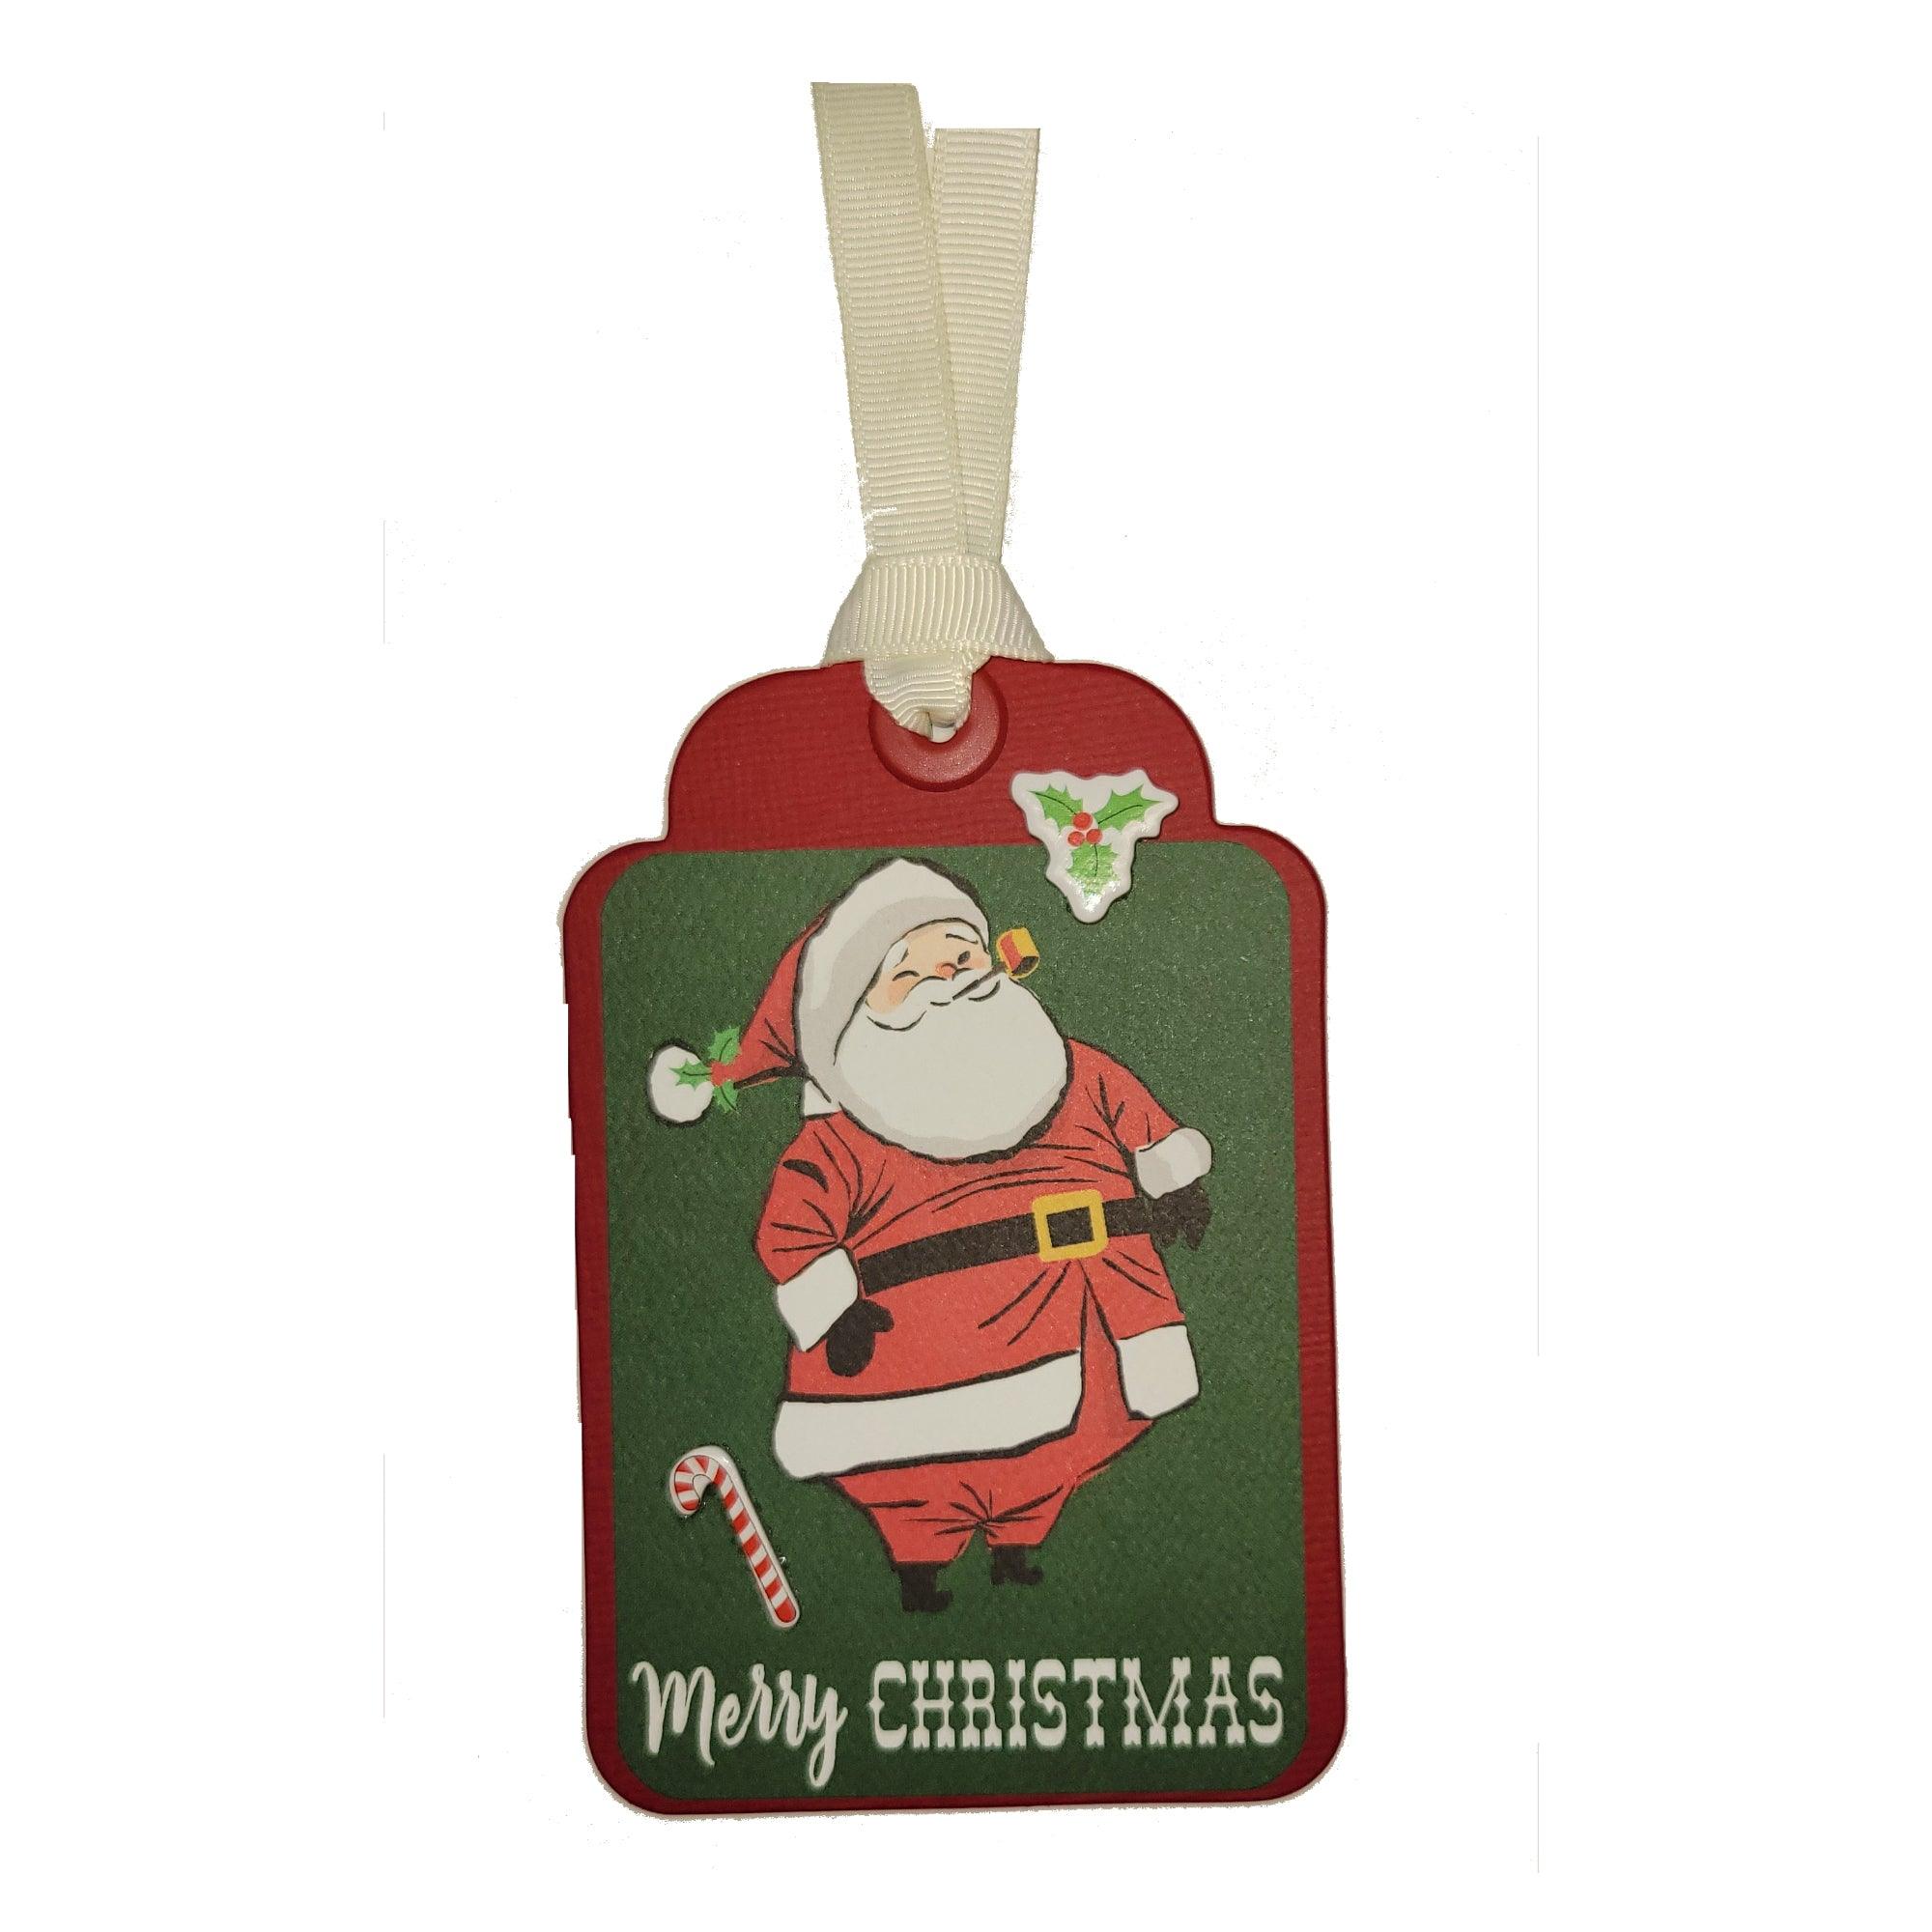 Christmas Collection Merry Christmas Santa Claus 3 x 4 Scrapbook Tag Embellishment by SSC Designs